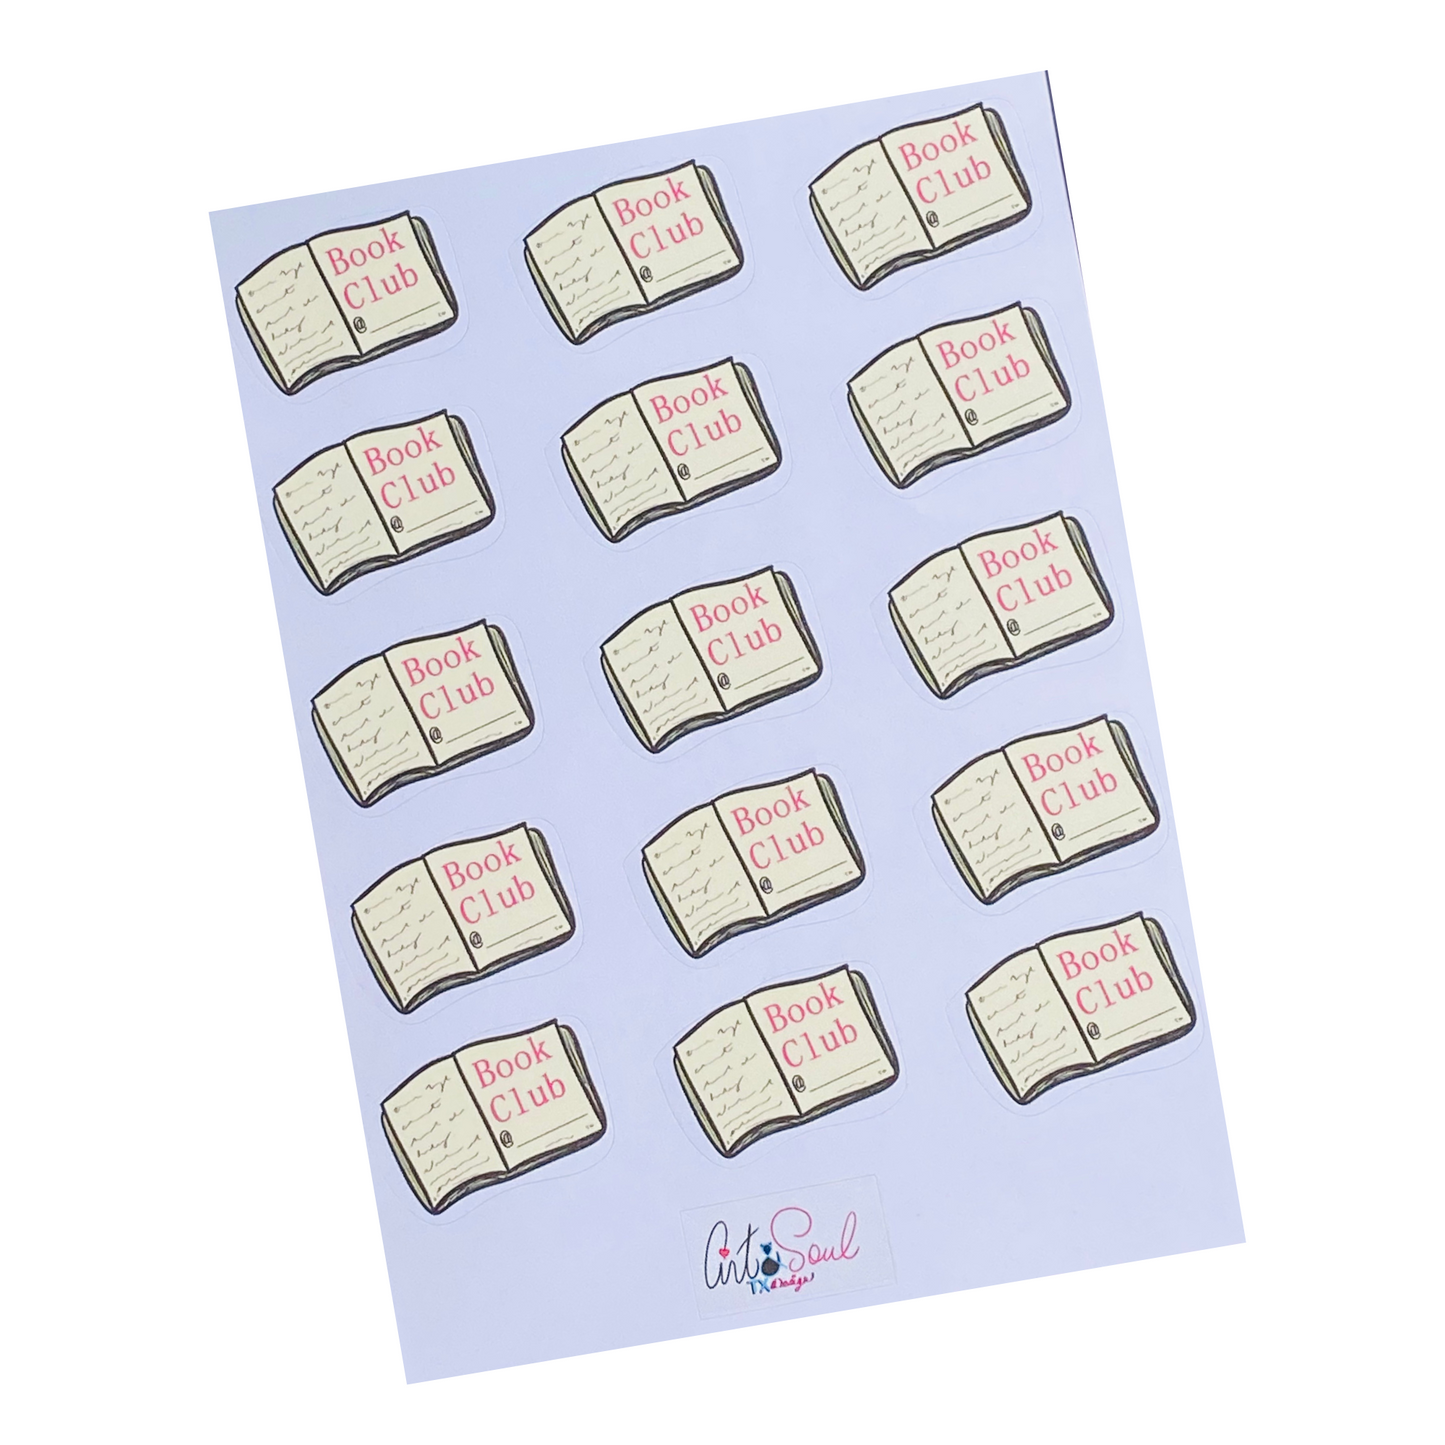 Book Club Planner Stickers